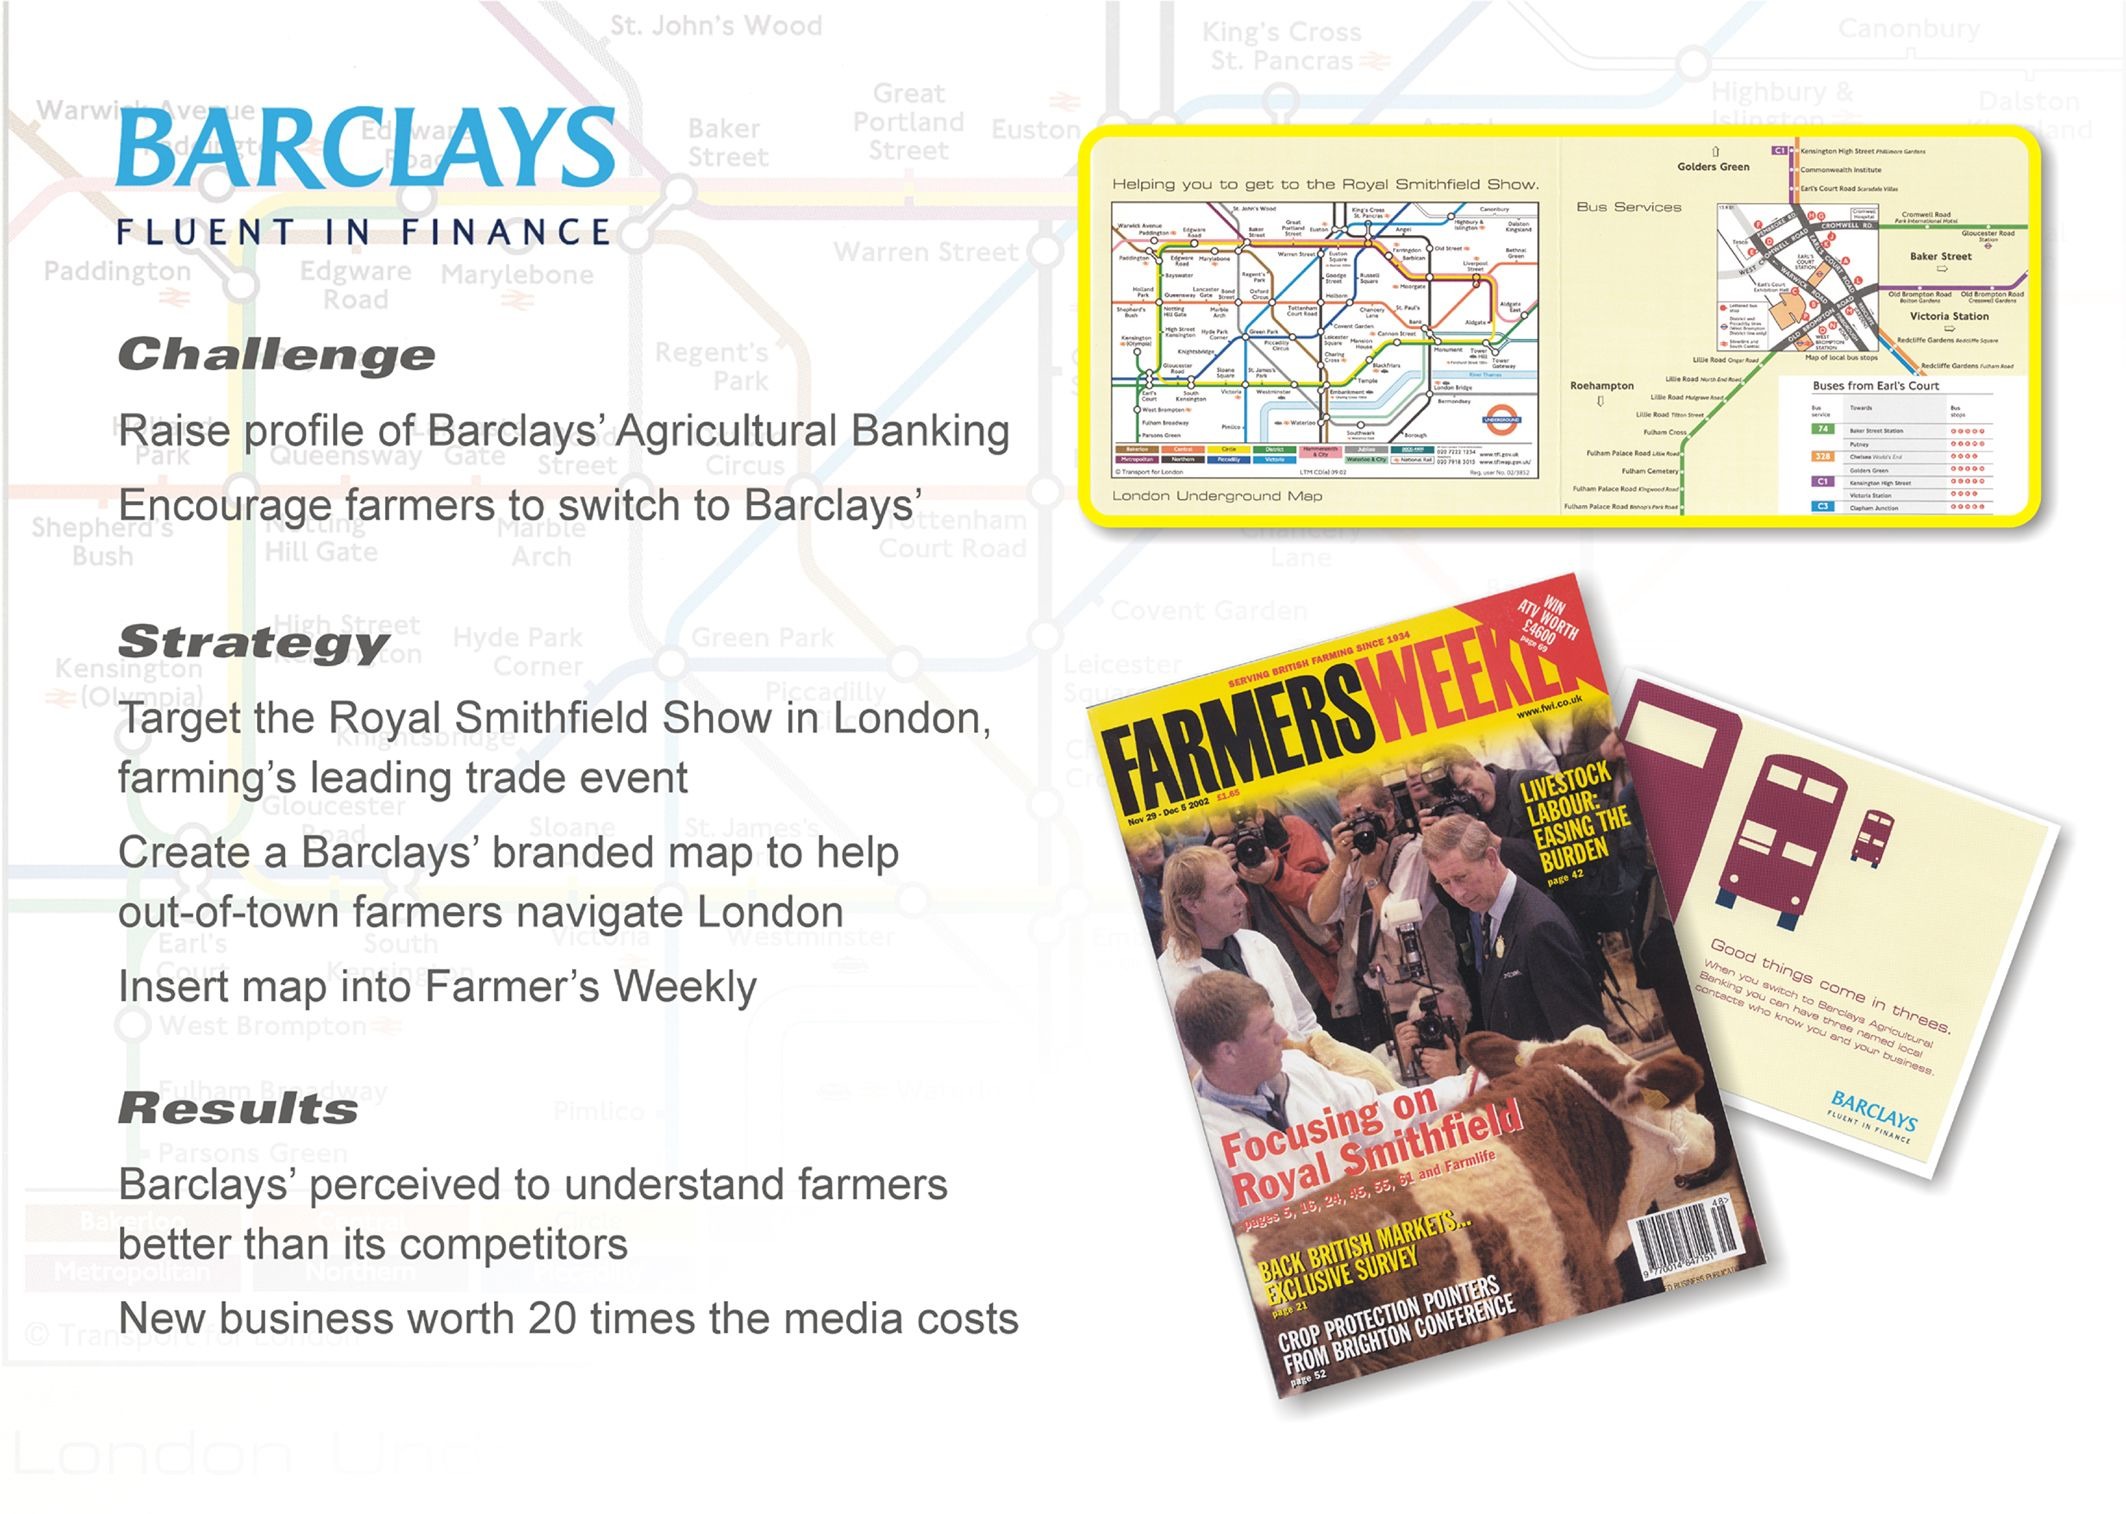 BARCLAY'S BUSINESS BANKING